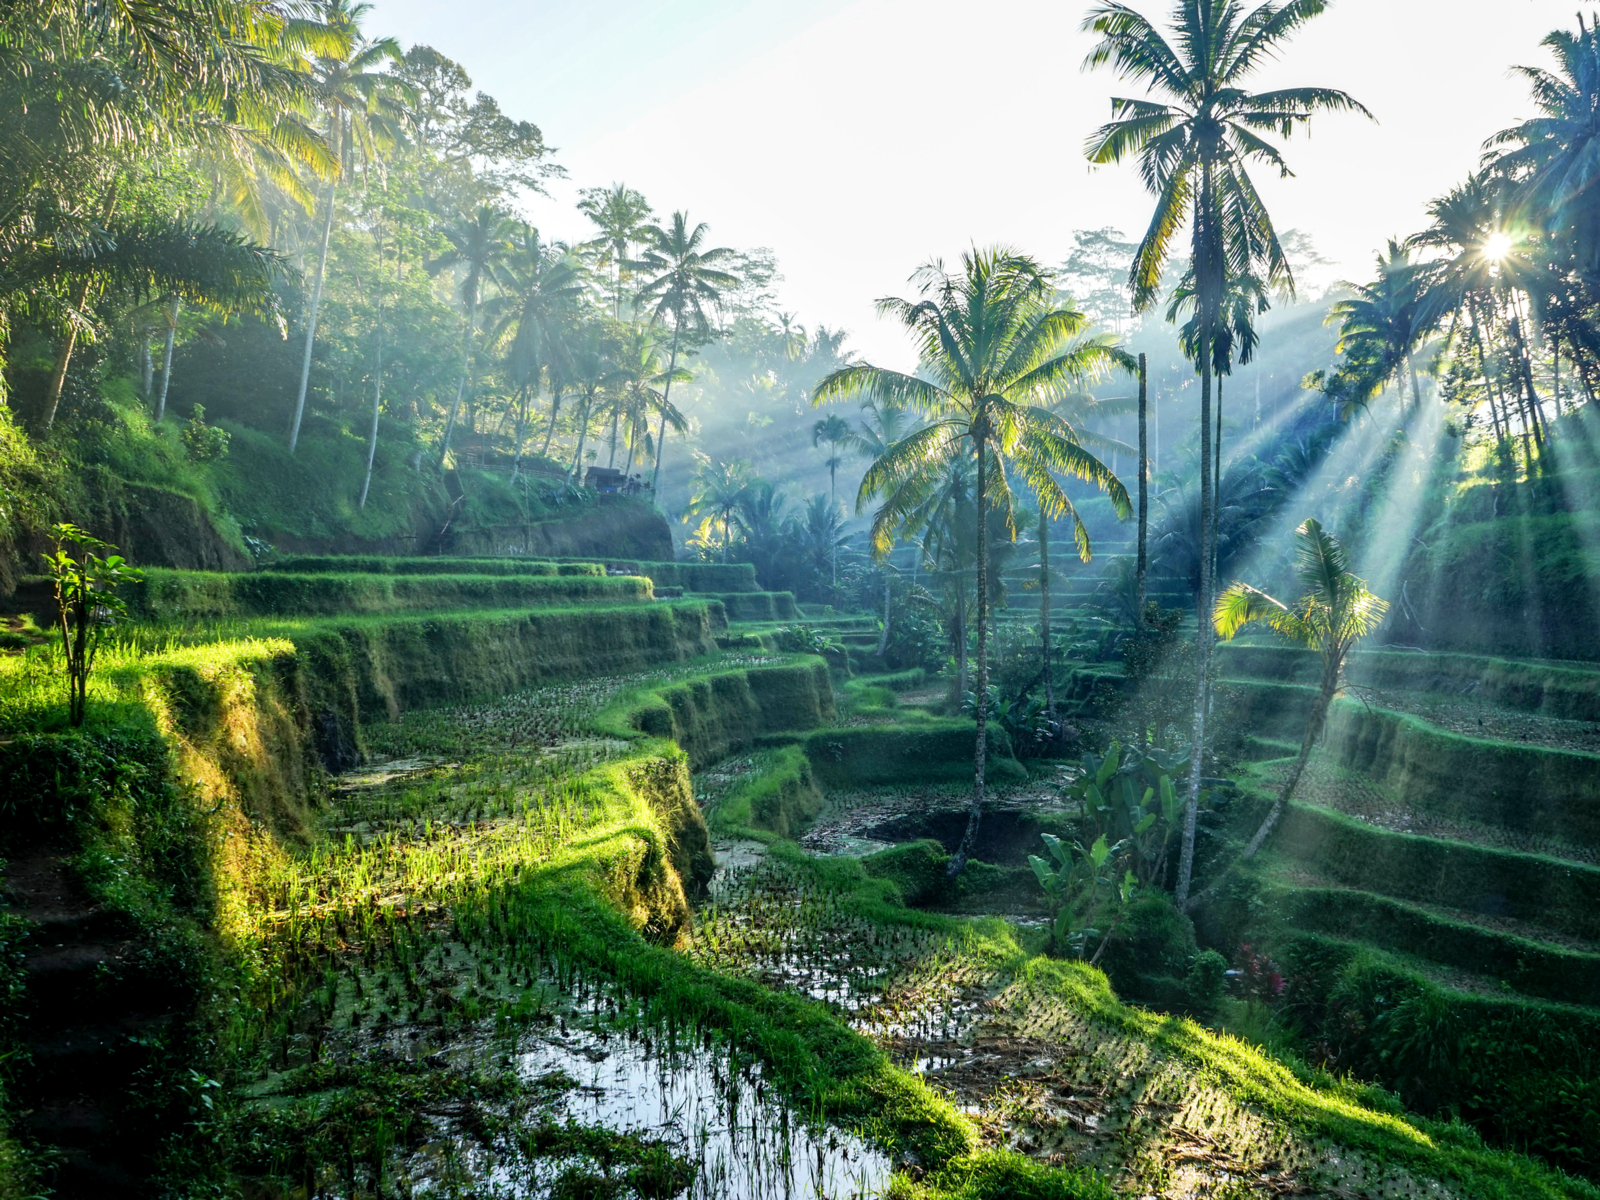 Giant terraces of rice paddies during the best time to visit Bali